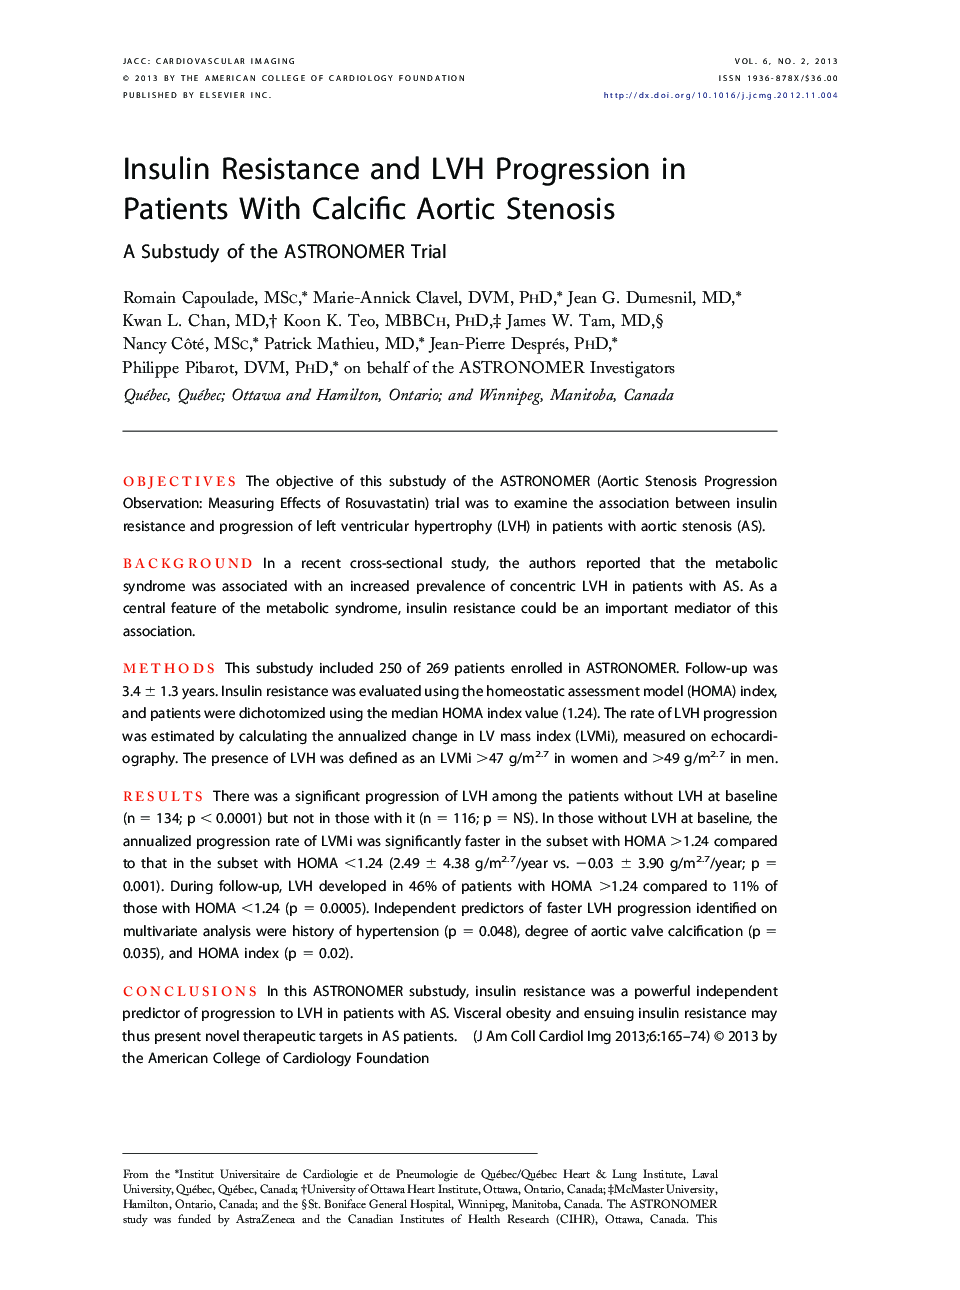 Insulin Resistance and LVH Progression in Patients With Calcific Aortic Stenosis : A Substudy of the ASTRONOMER Trial